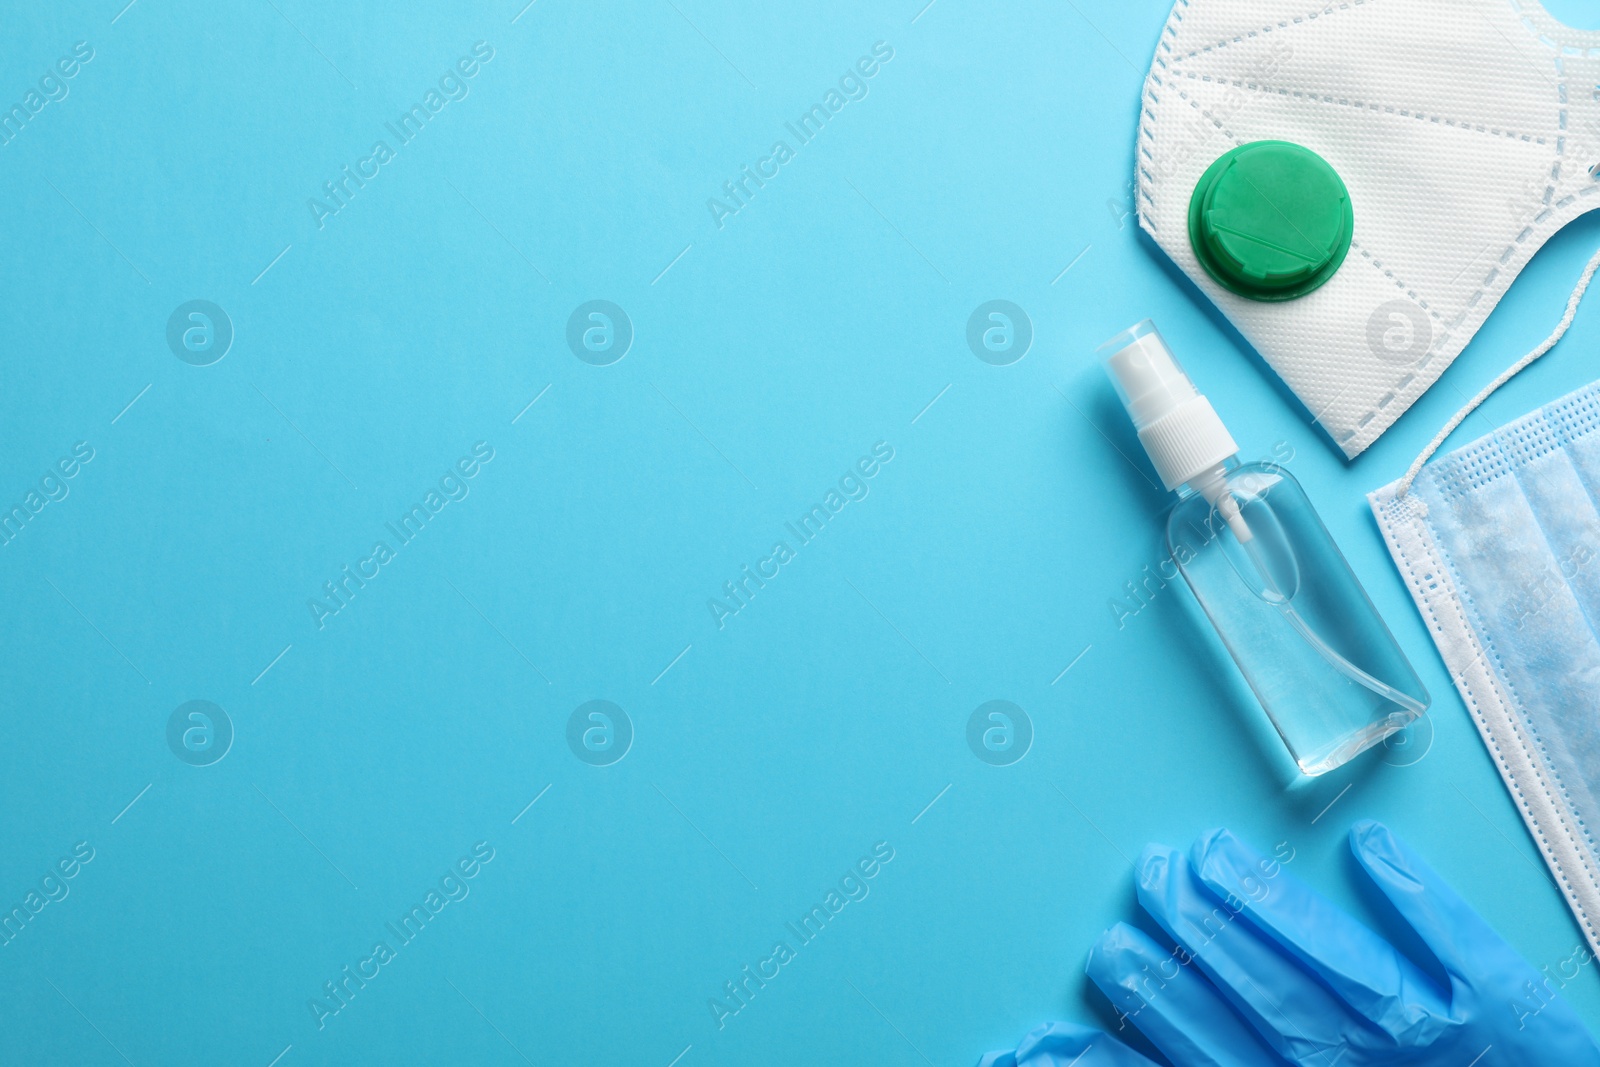 Photo of Medical gloves, masks and hand sanitizer on light blue background, flat lay with space for text. Safety equipment